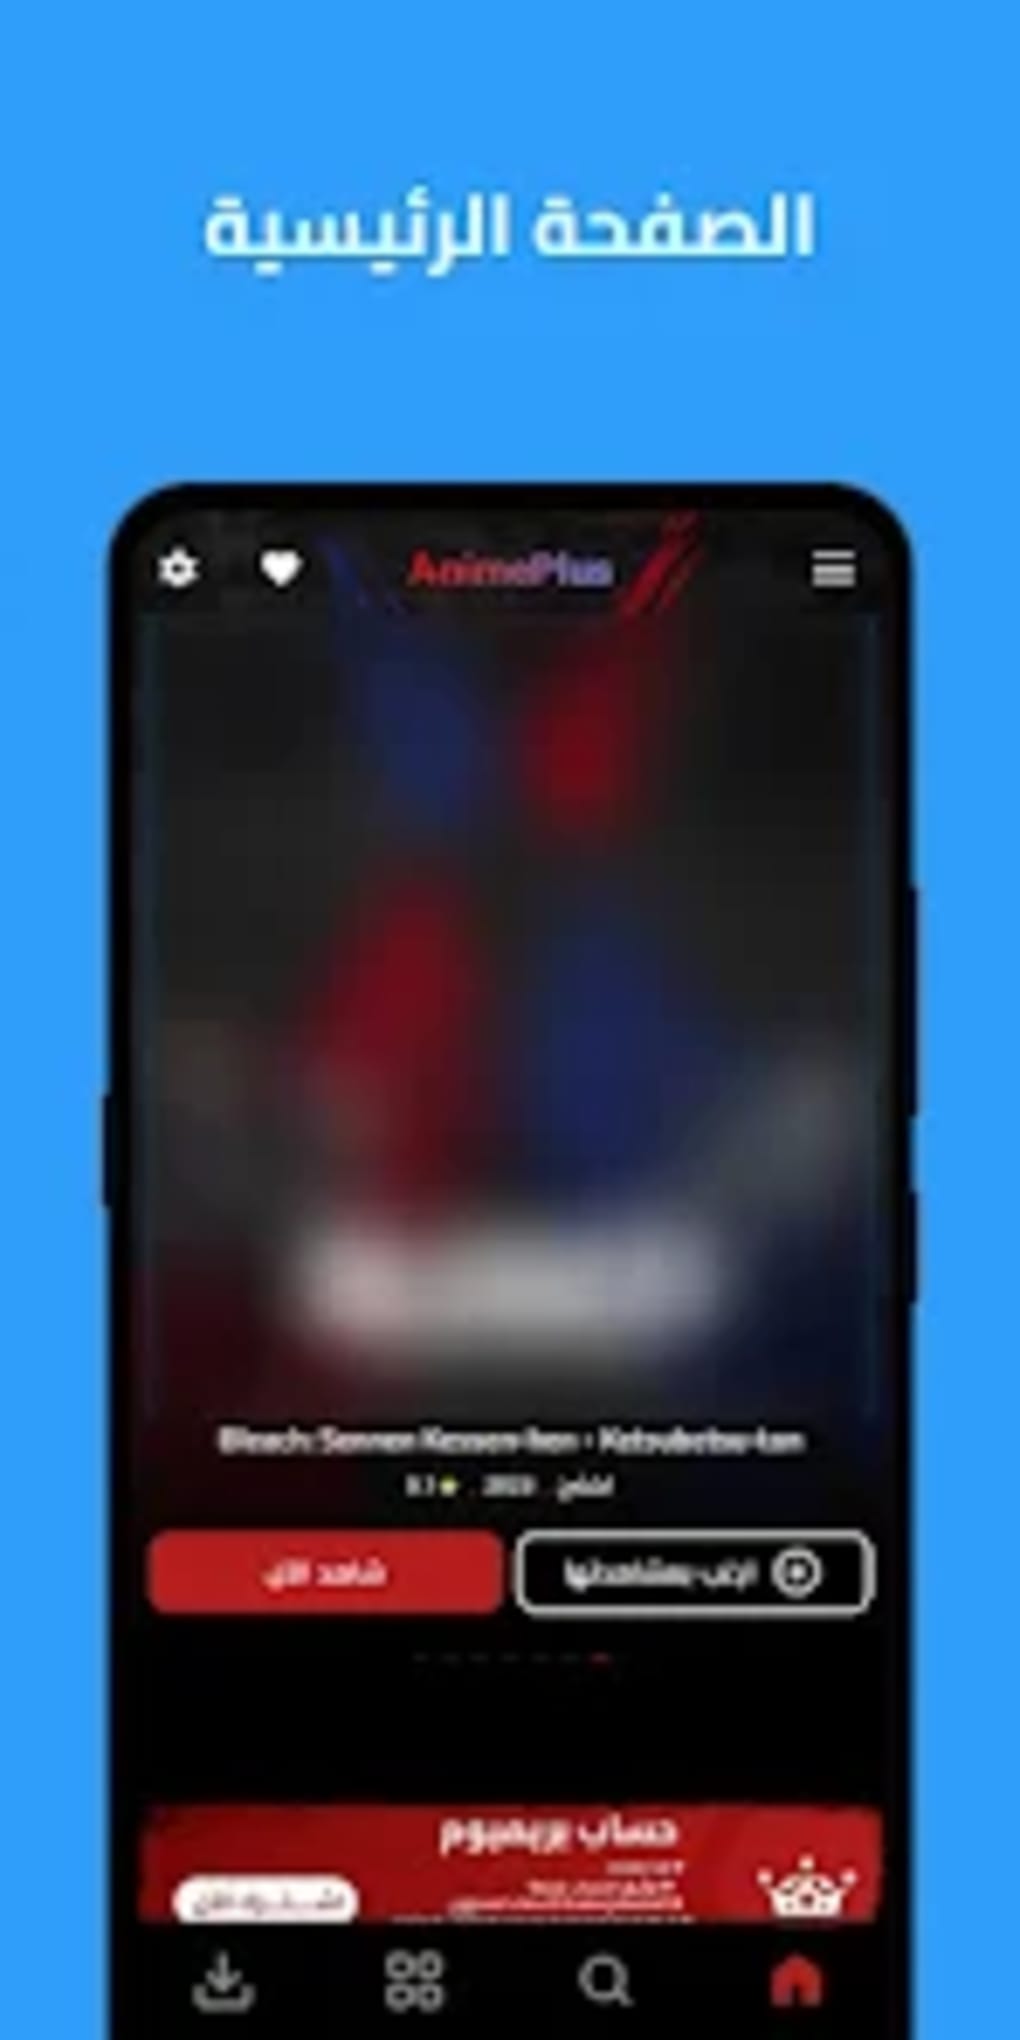 Animex plus for Android - Free App Download